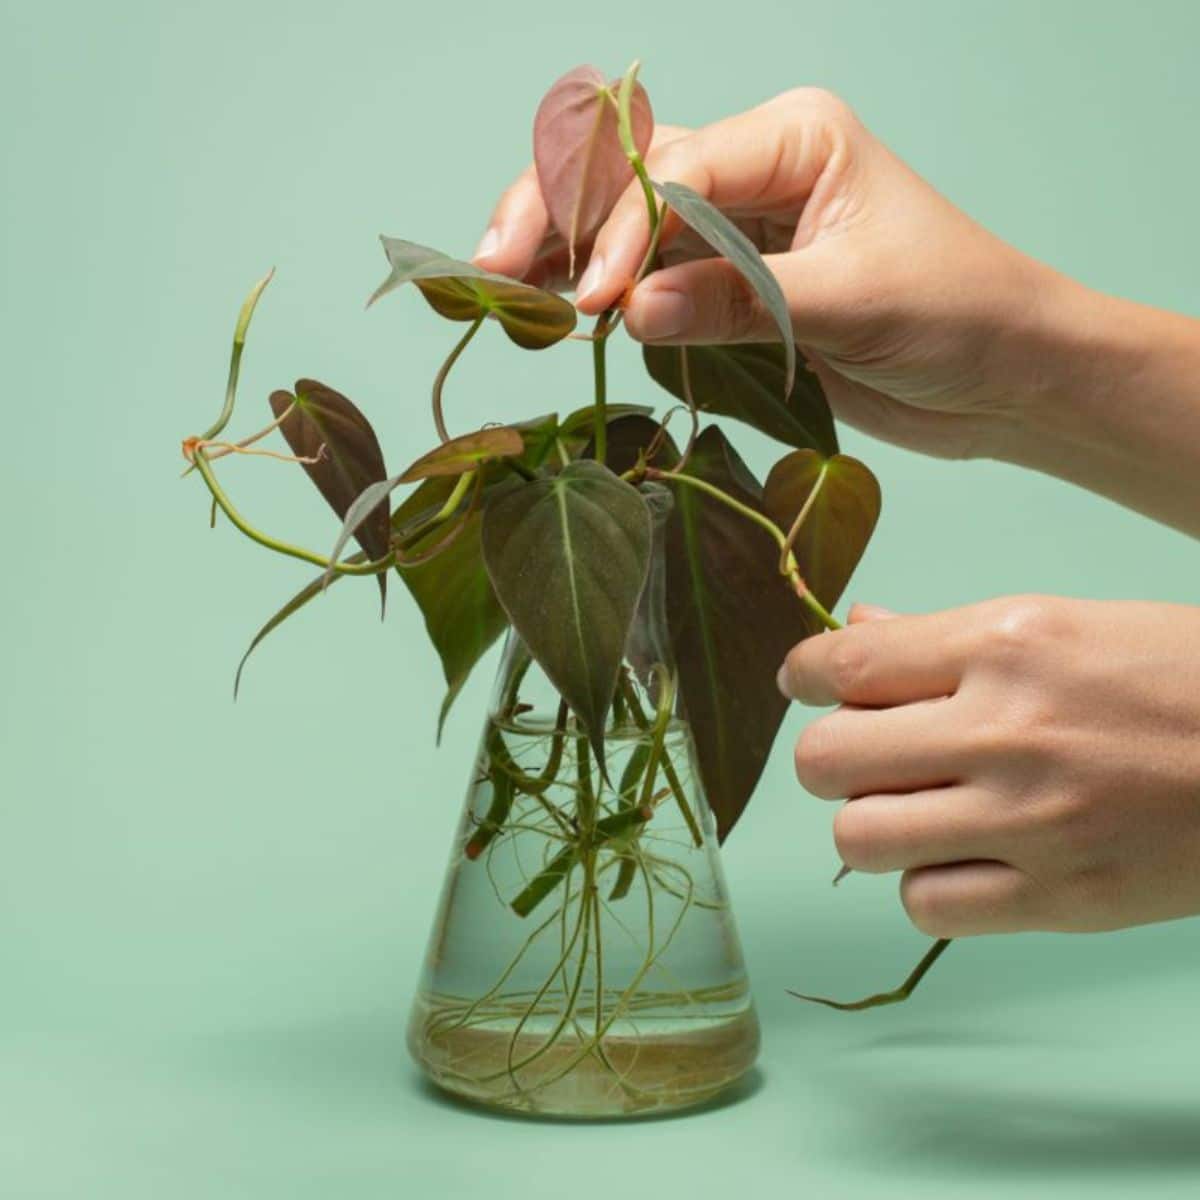 A gardener holding philodendron cuttings in a glass container.